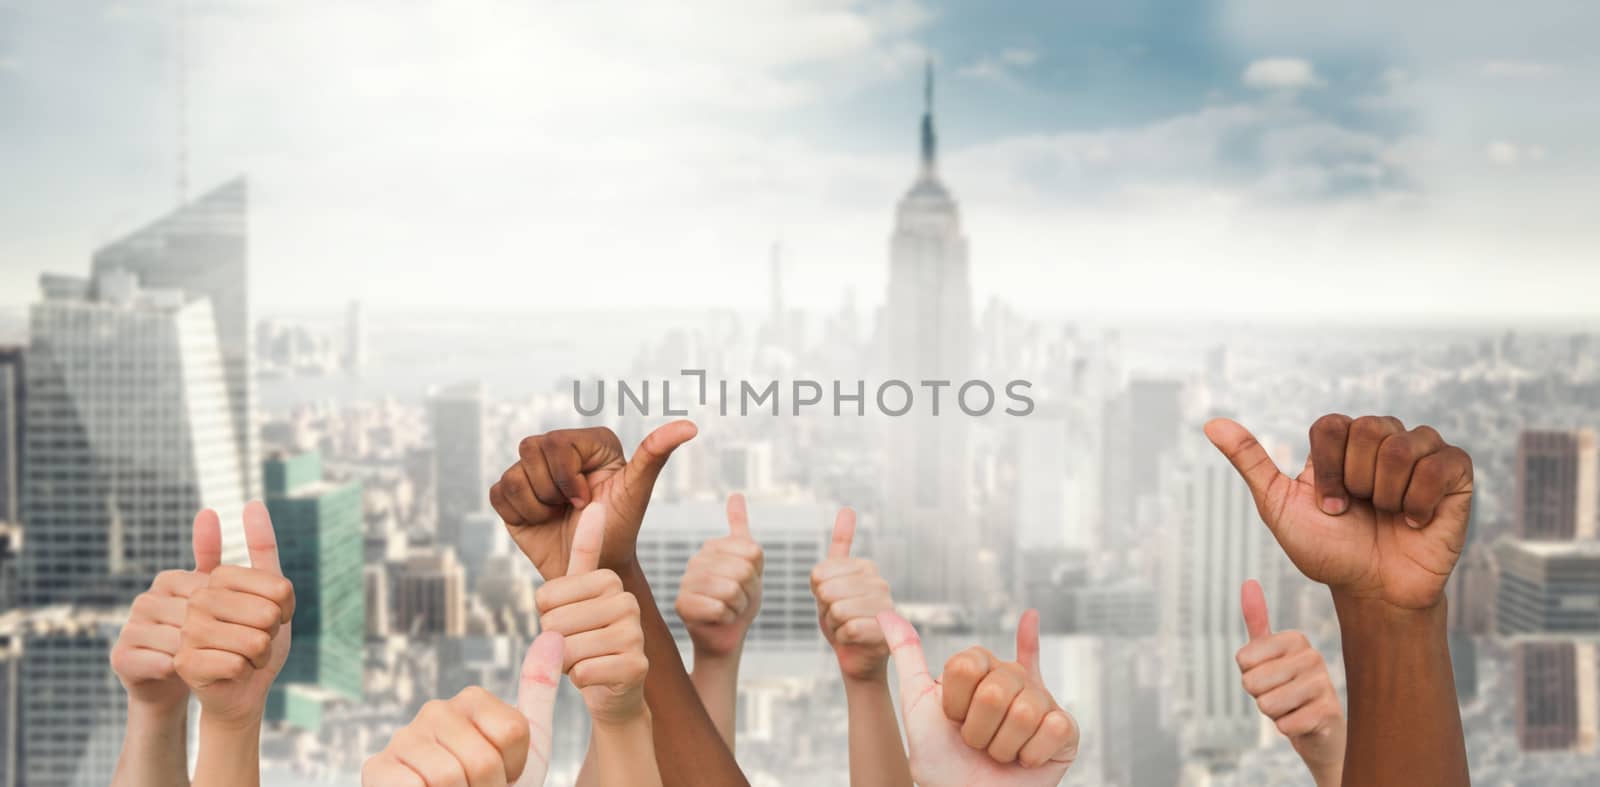 Hands giving thumbs up  against room with large window looking on city